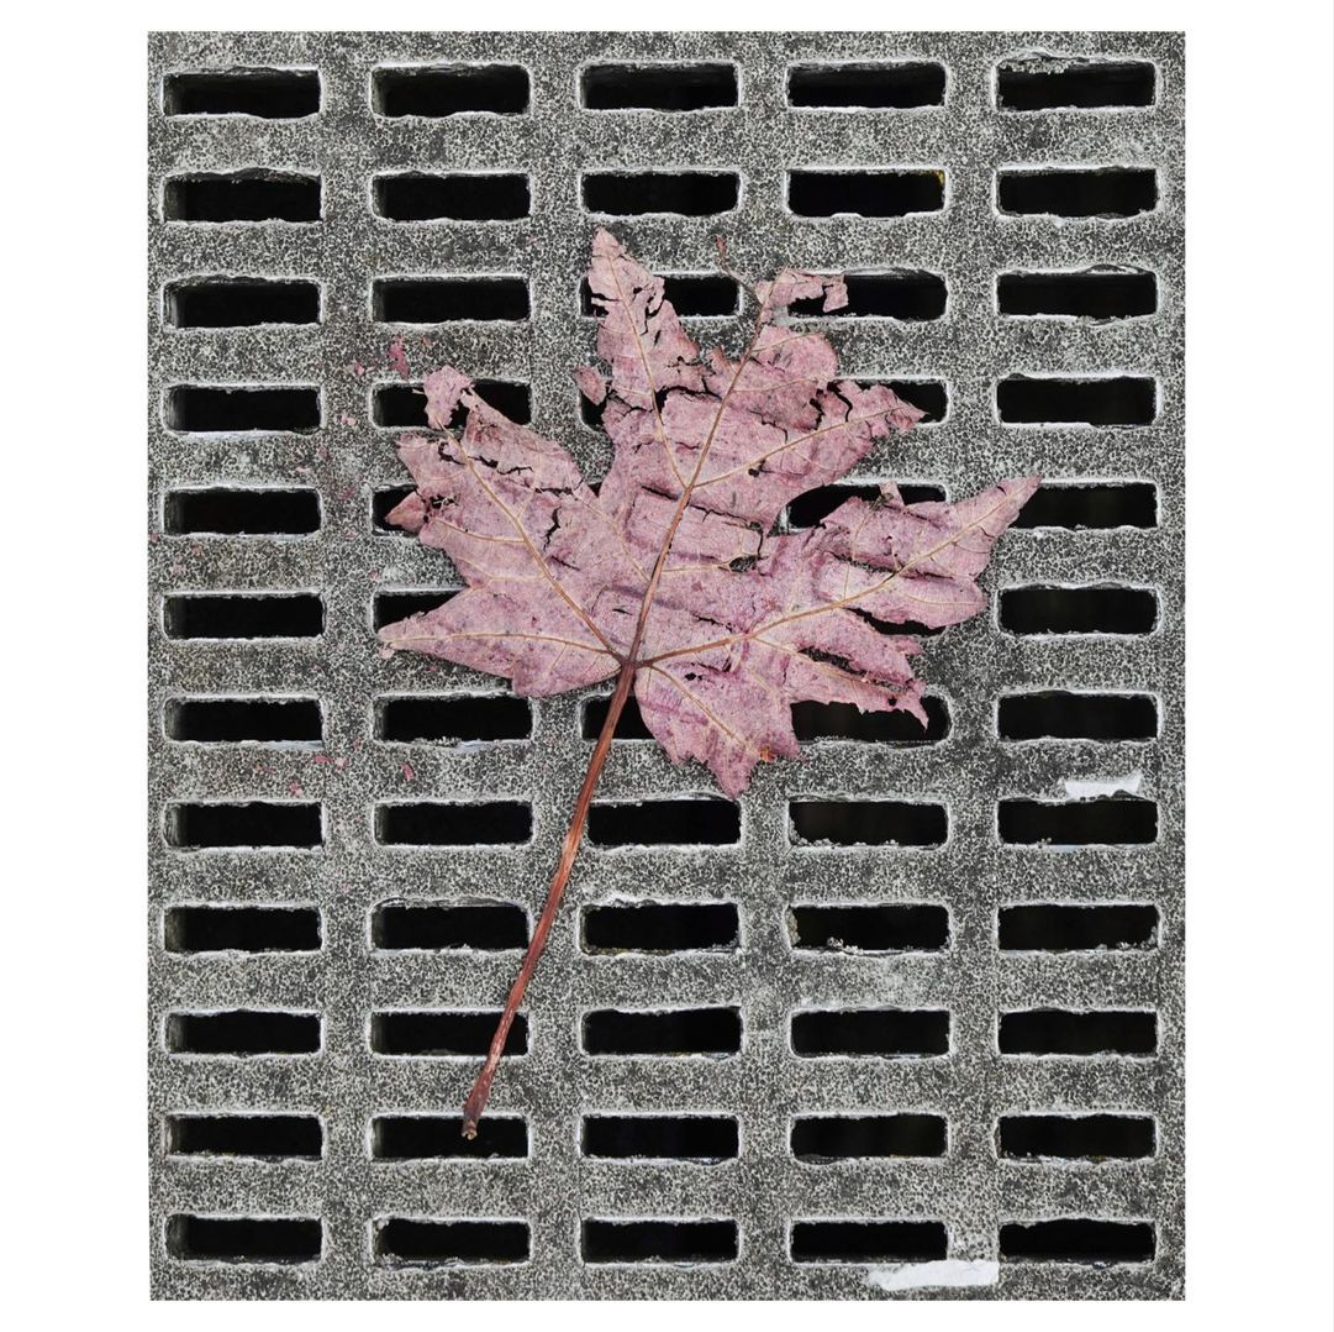 dry red leaf crumbling on a manhole cover